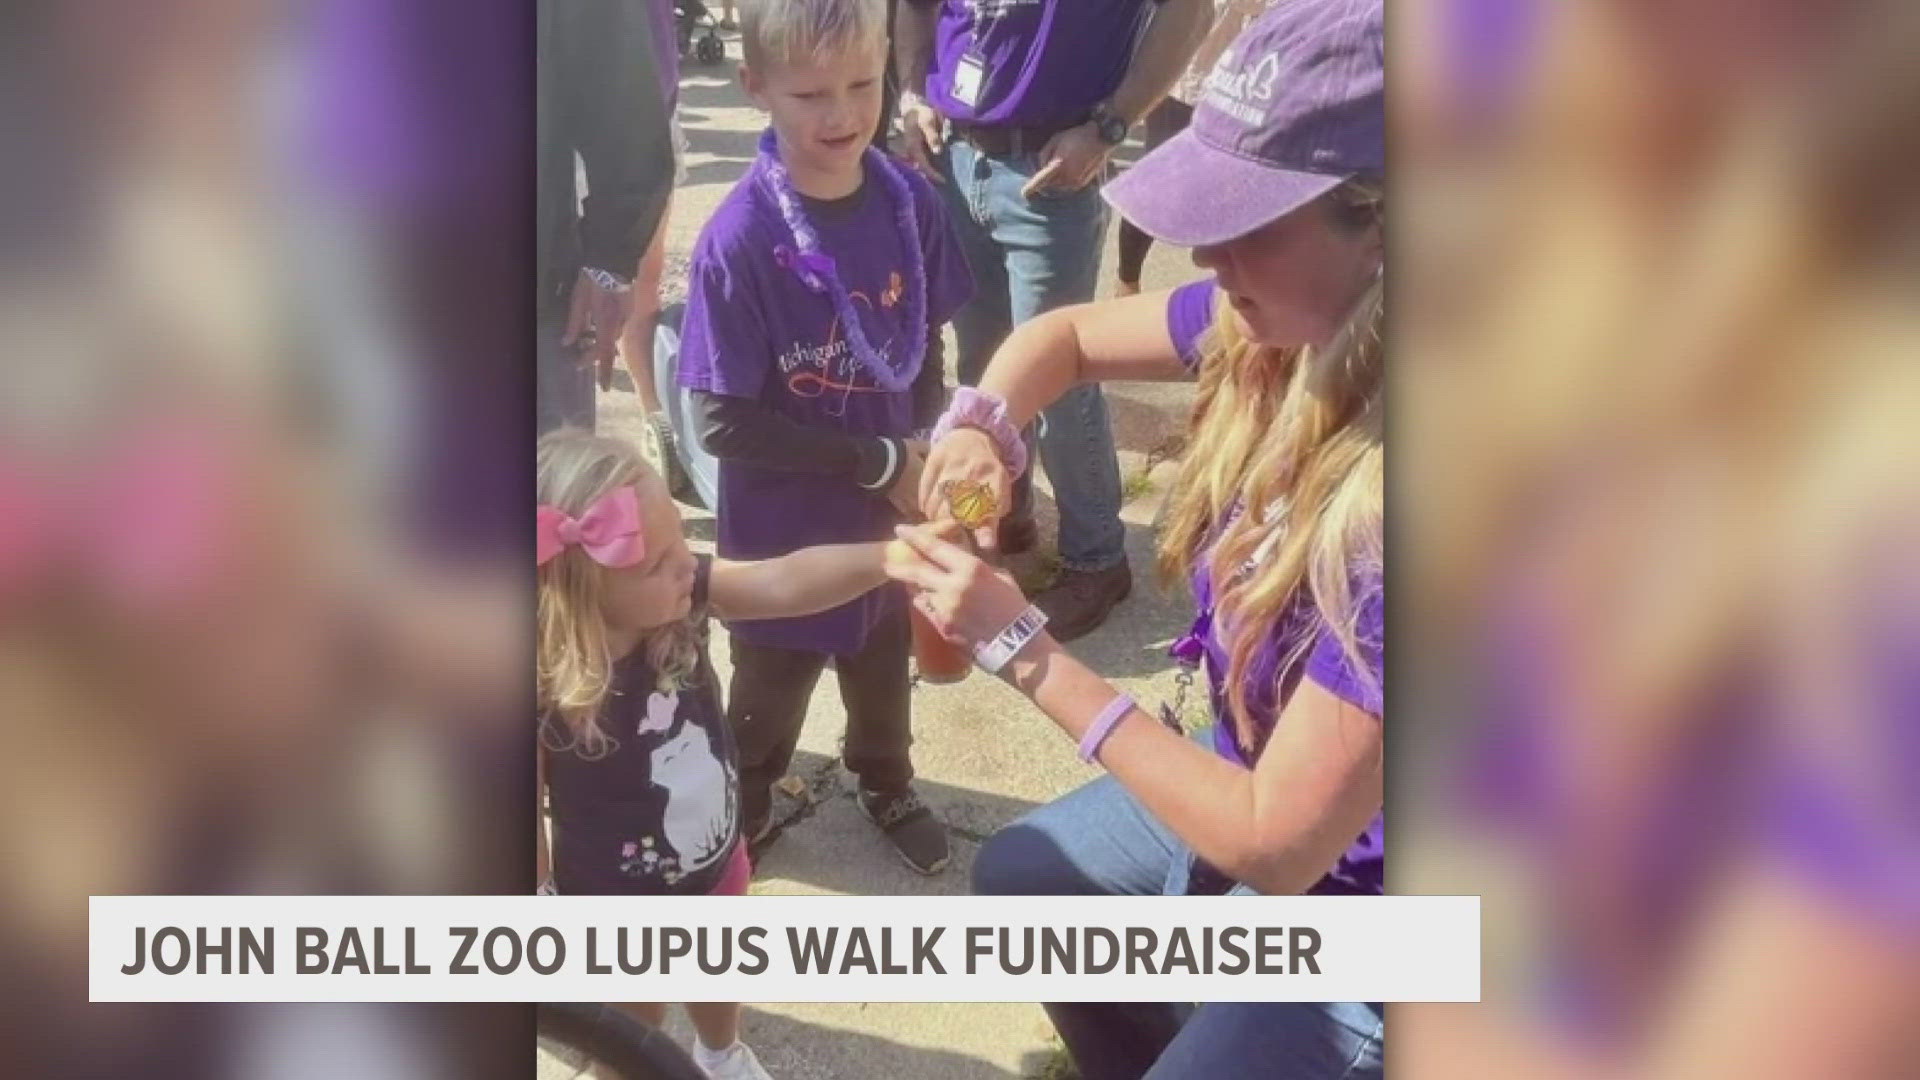 The walk supports lupus awareness, patient services and research to help find a cure.